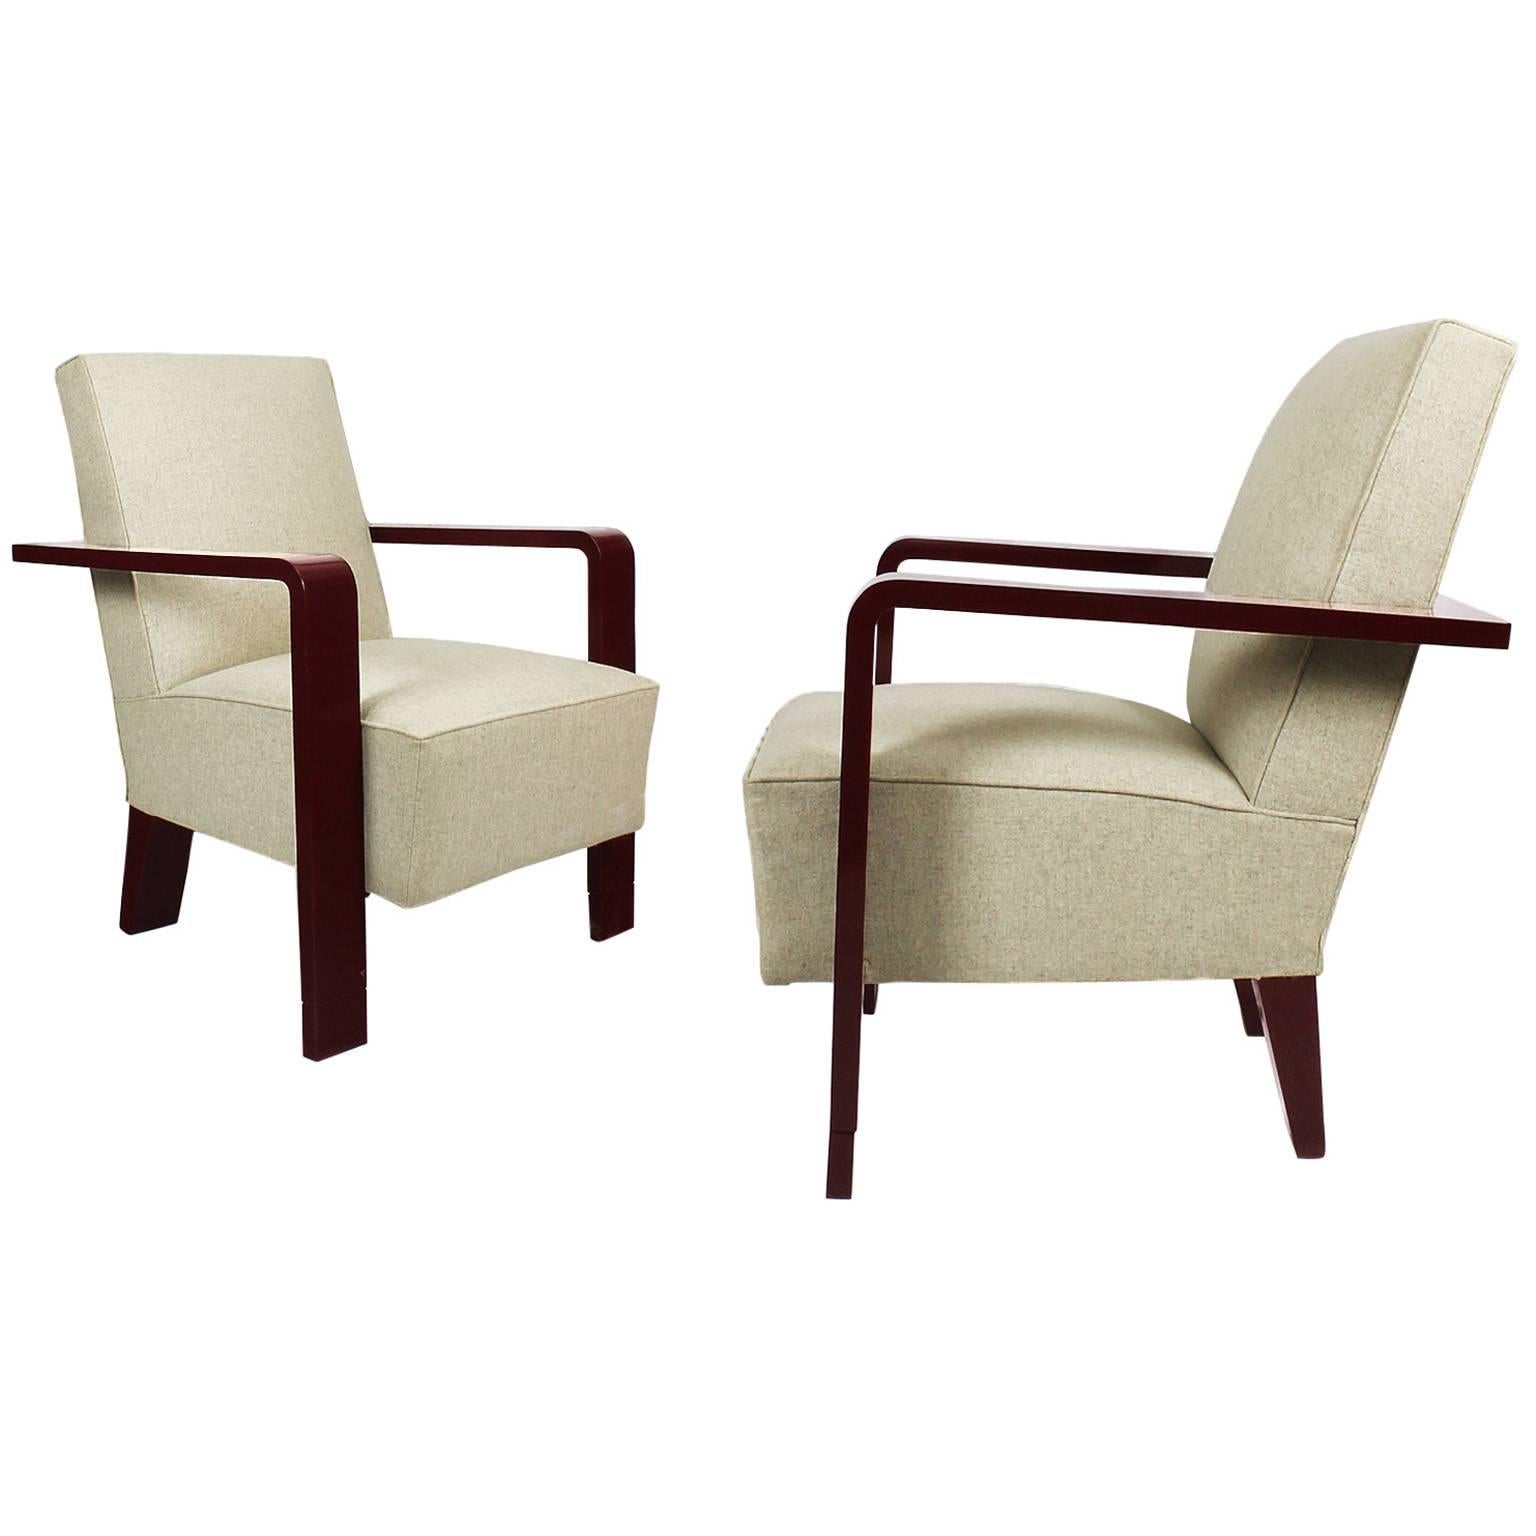 1930s Pair of Art Deco Cubist Armchairs, Lacquered Beech, Off White Wool Belgium